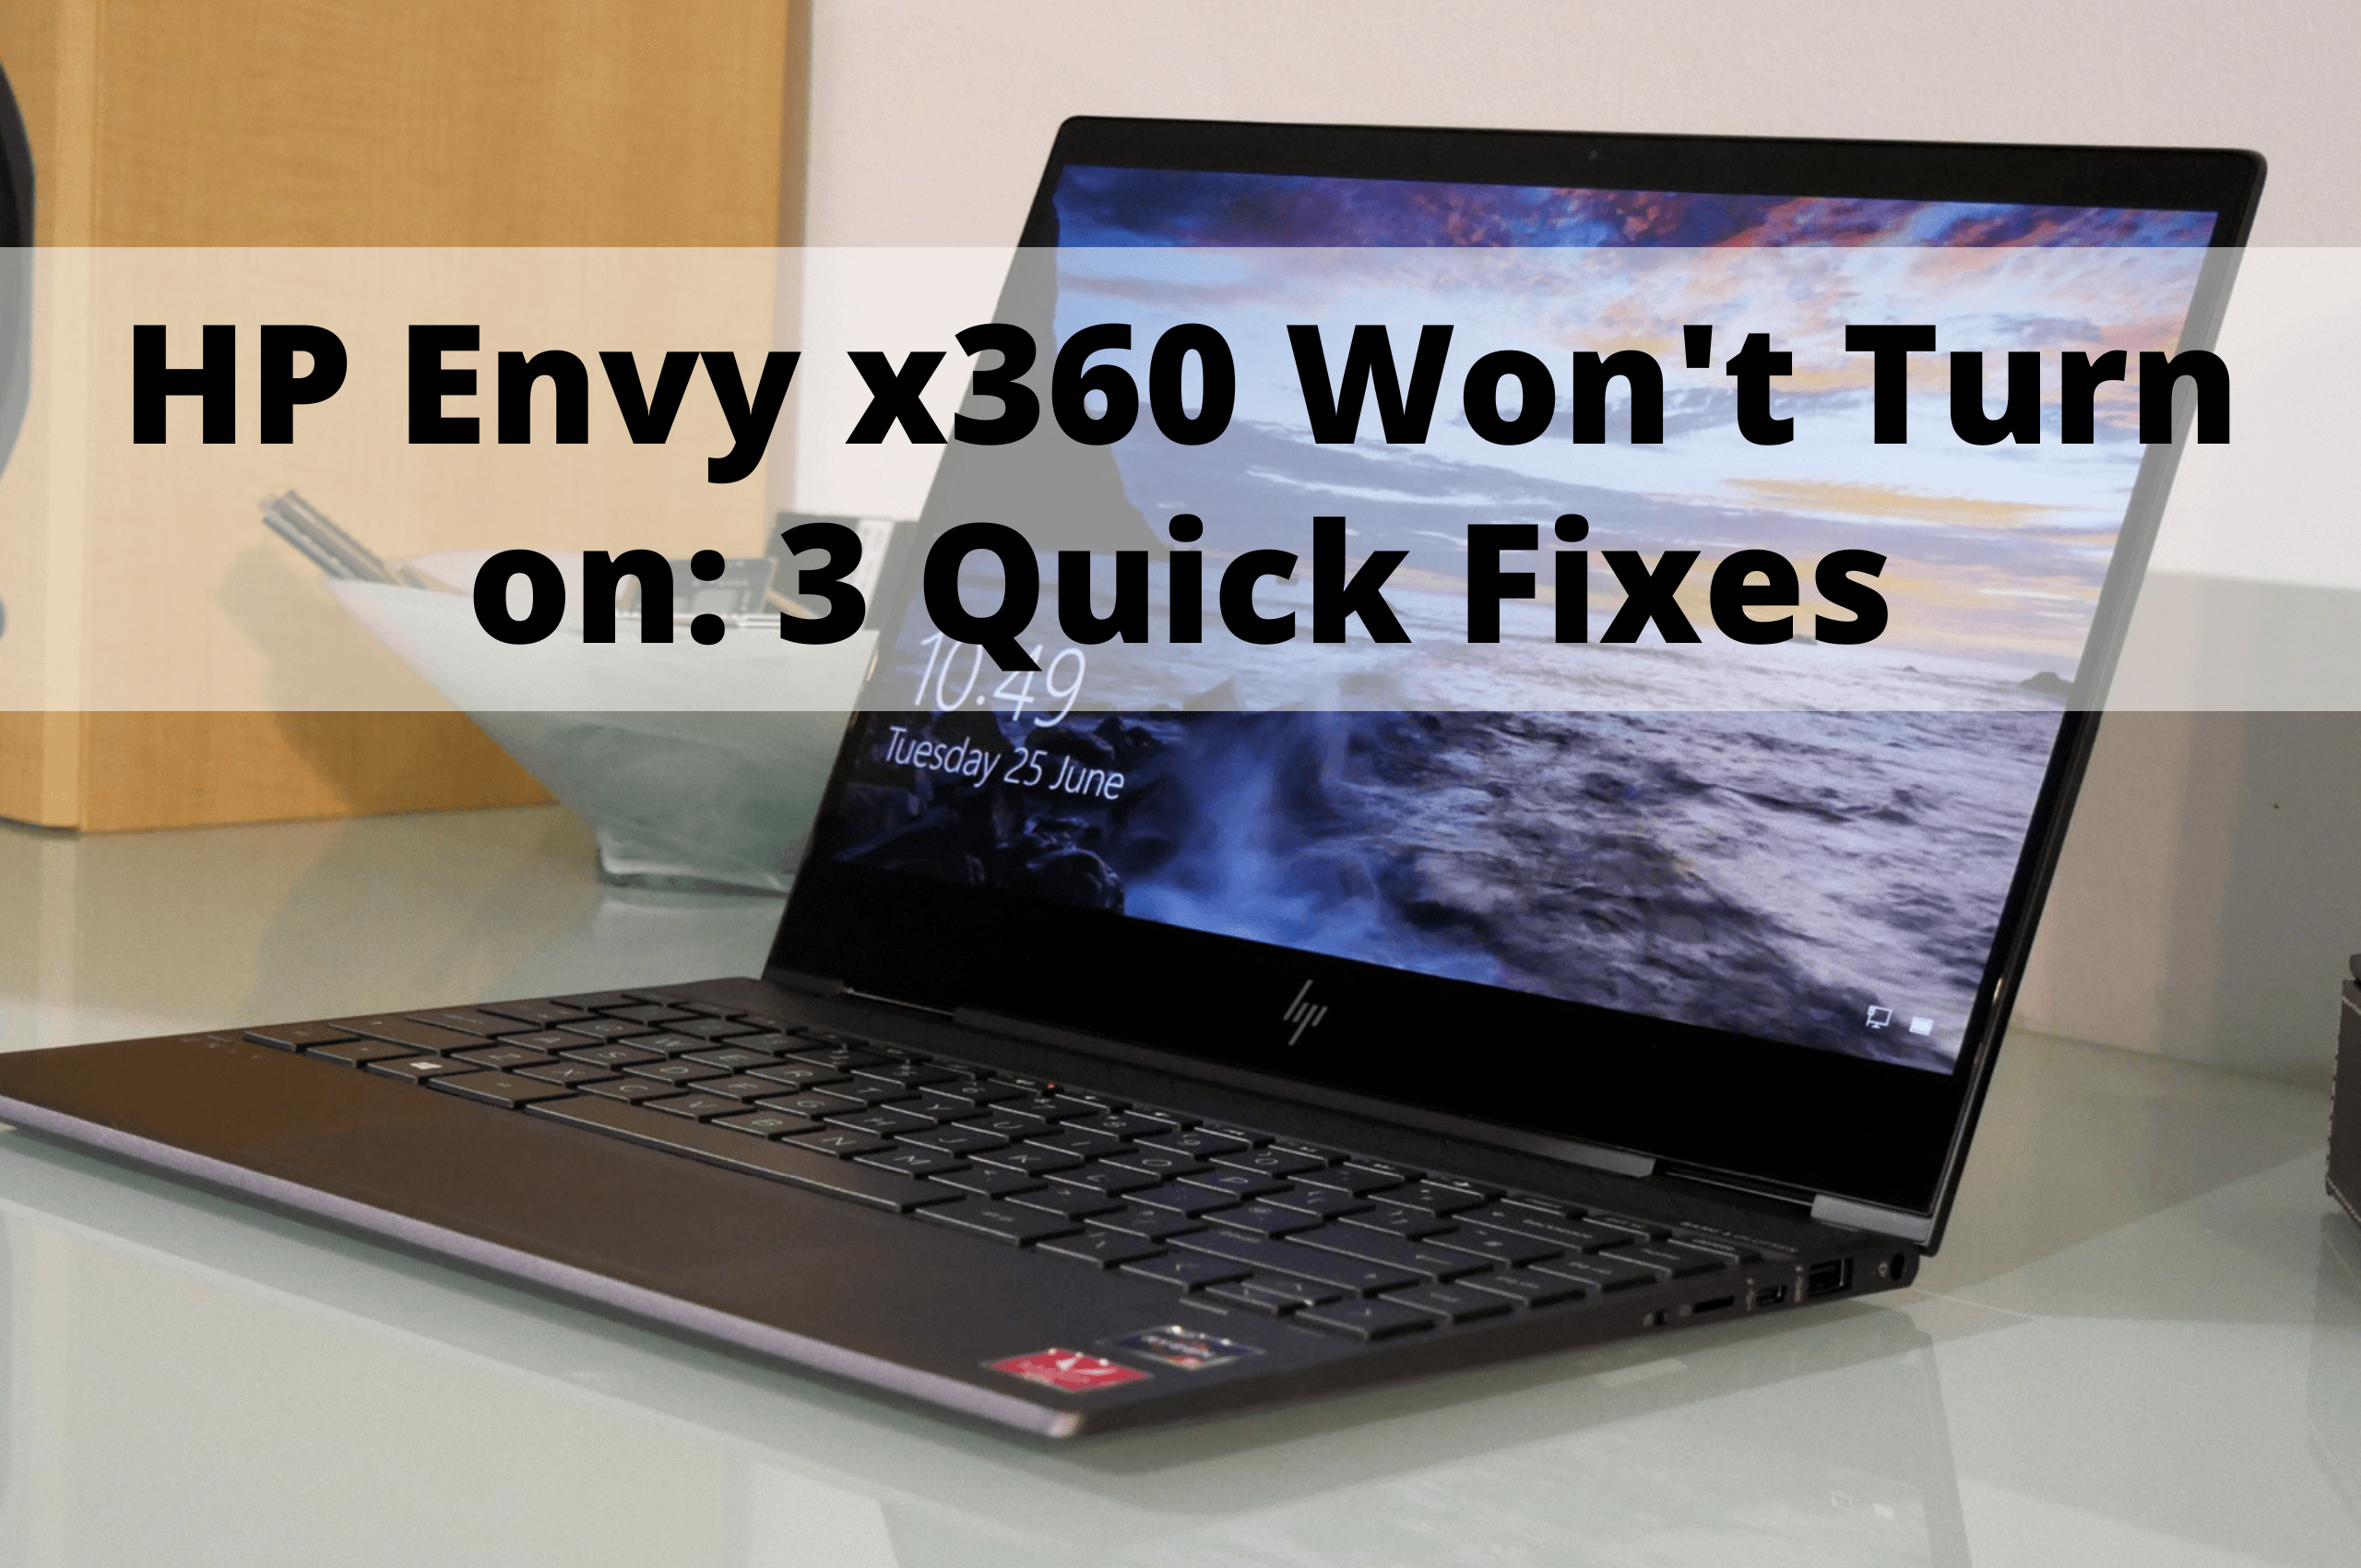 HP Envy x360 Won t Turn on Why It Happens and 3 Quick Fixes